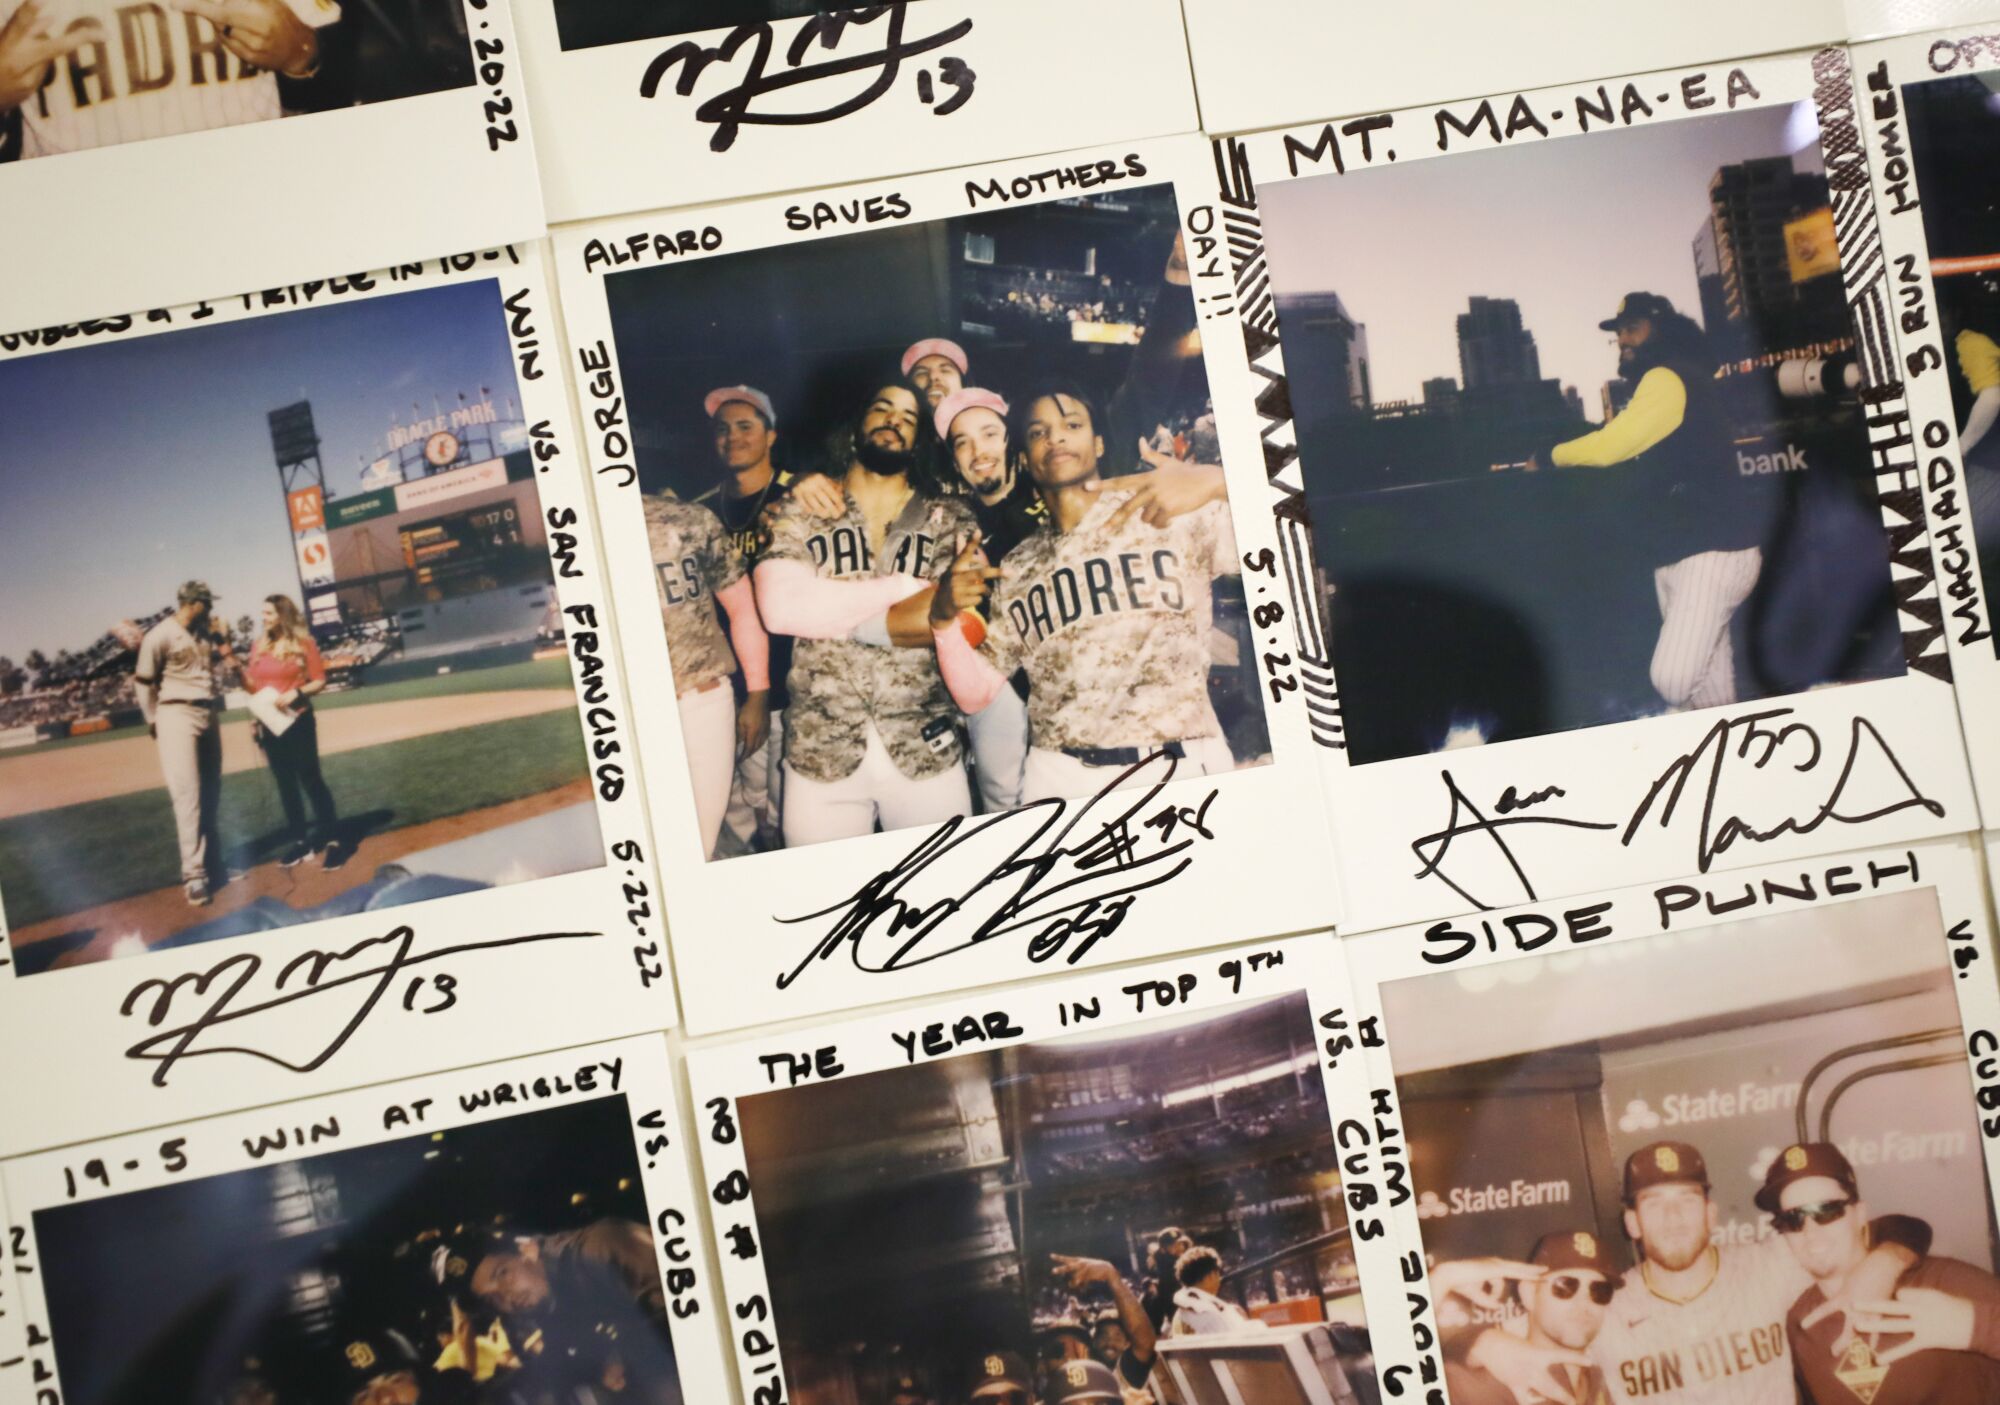 This Polaroid is titled 'Jorge Alfaro saves Mothers Day' after he hit a walk-off home run in May.